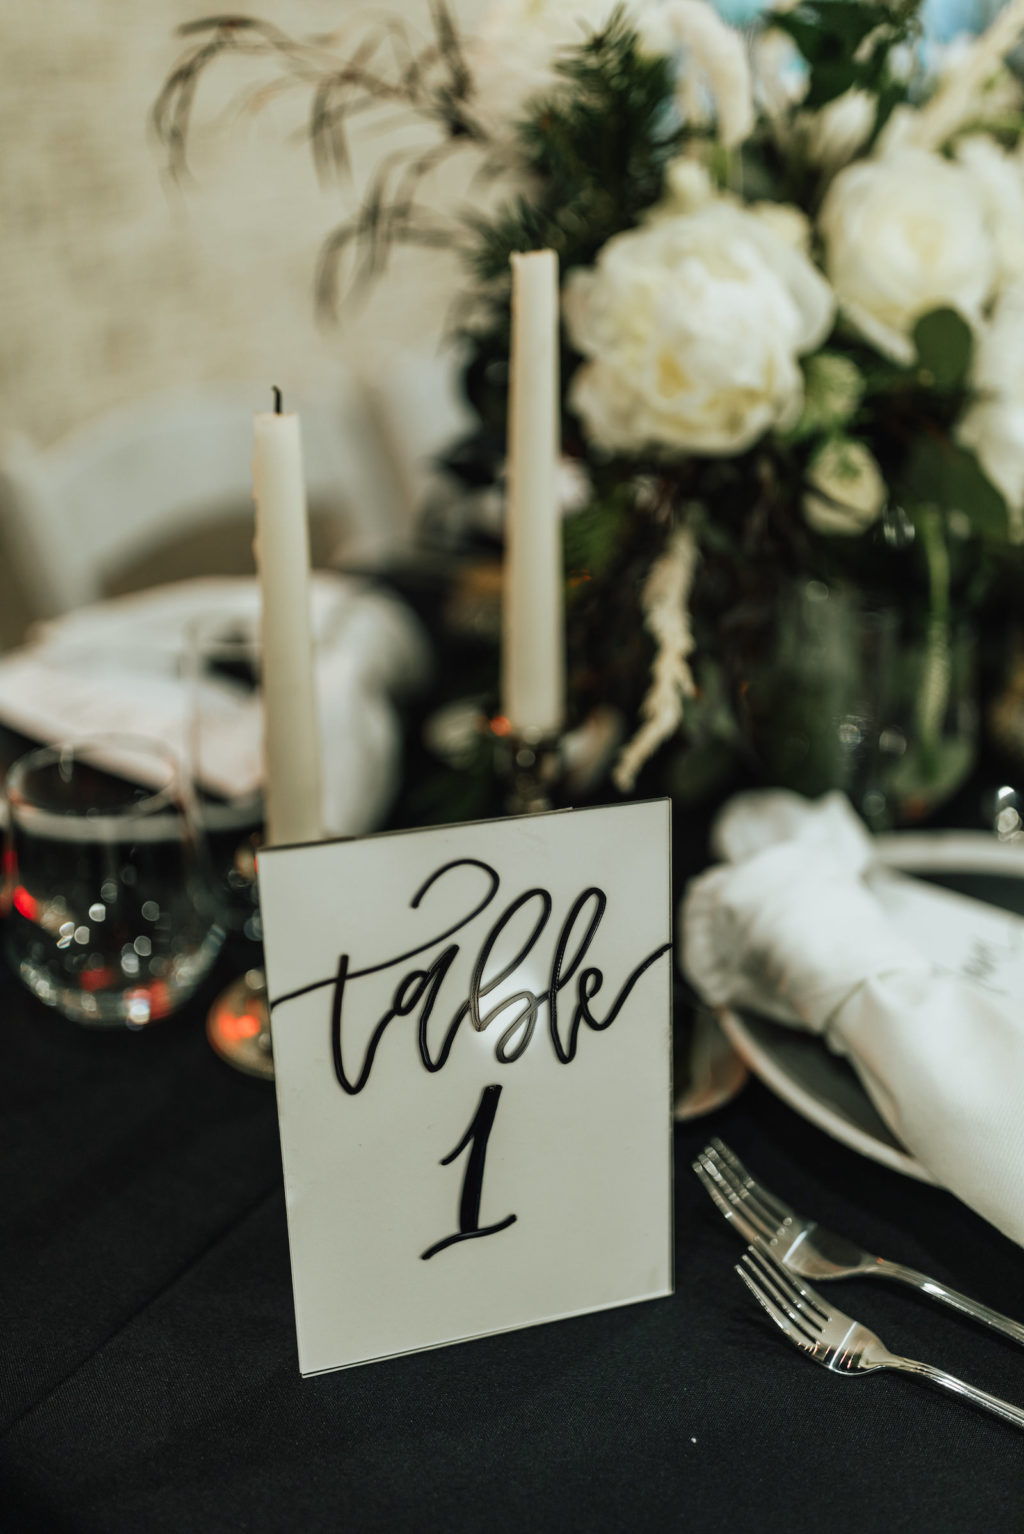 Black and White Winter Florida Modern Industrial Wedding Reception Table Inspiration | Black Table Linen with Black and White China Plates, White Napkins, Taper Candles, and Floral Centerpieces of White Roses and Winter Pine Greenery | Black and White Calligraphy Table Number Card